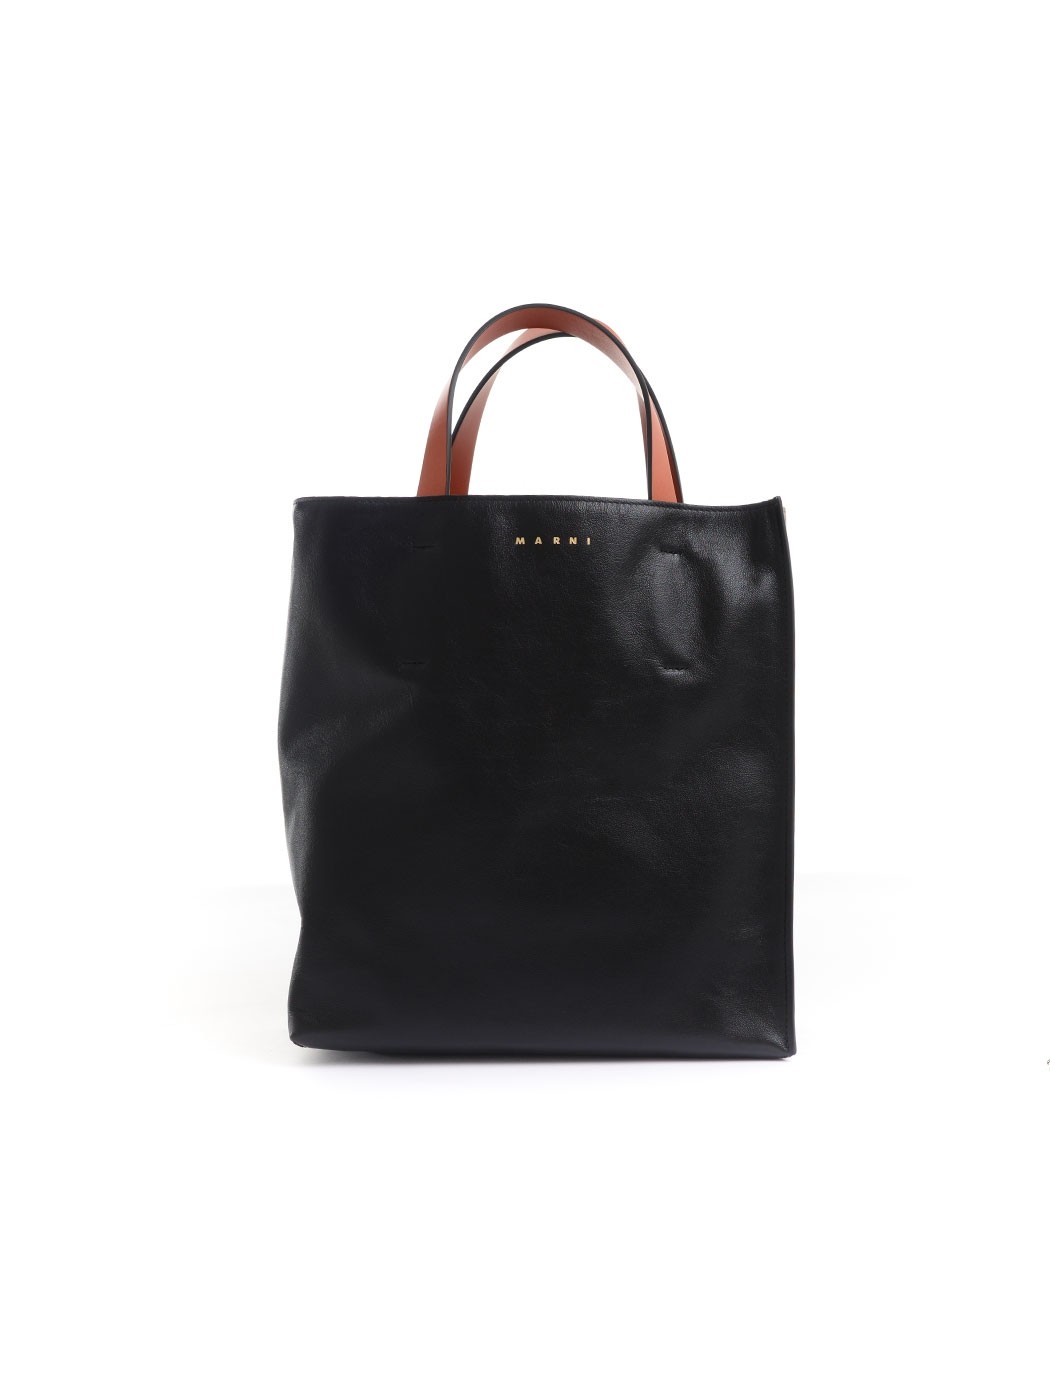  WOMAN BAGS,SPRING SUMMER COLLECTION,GIVENCHY BAGS,MARNI BAGS,LES PETITS JOUEURS BAGS  MARNI SHMP0018U1